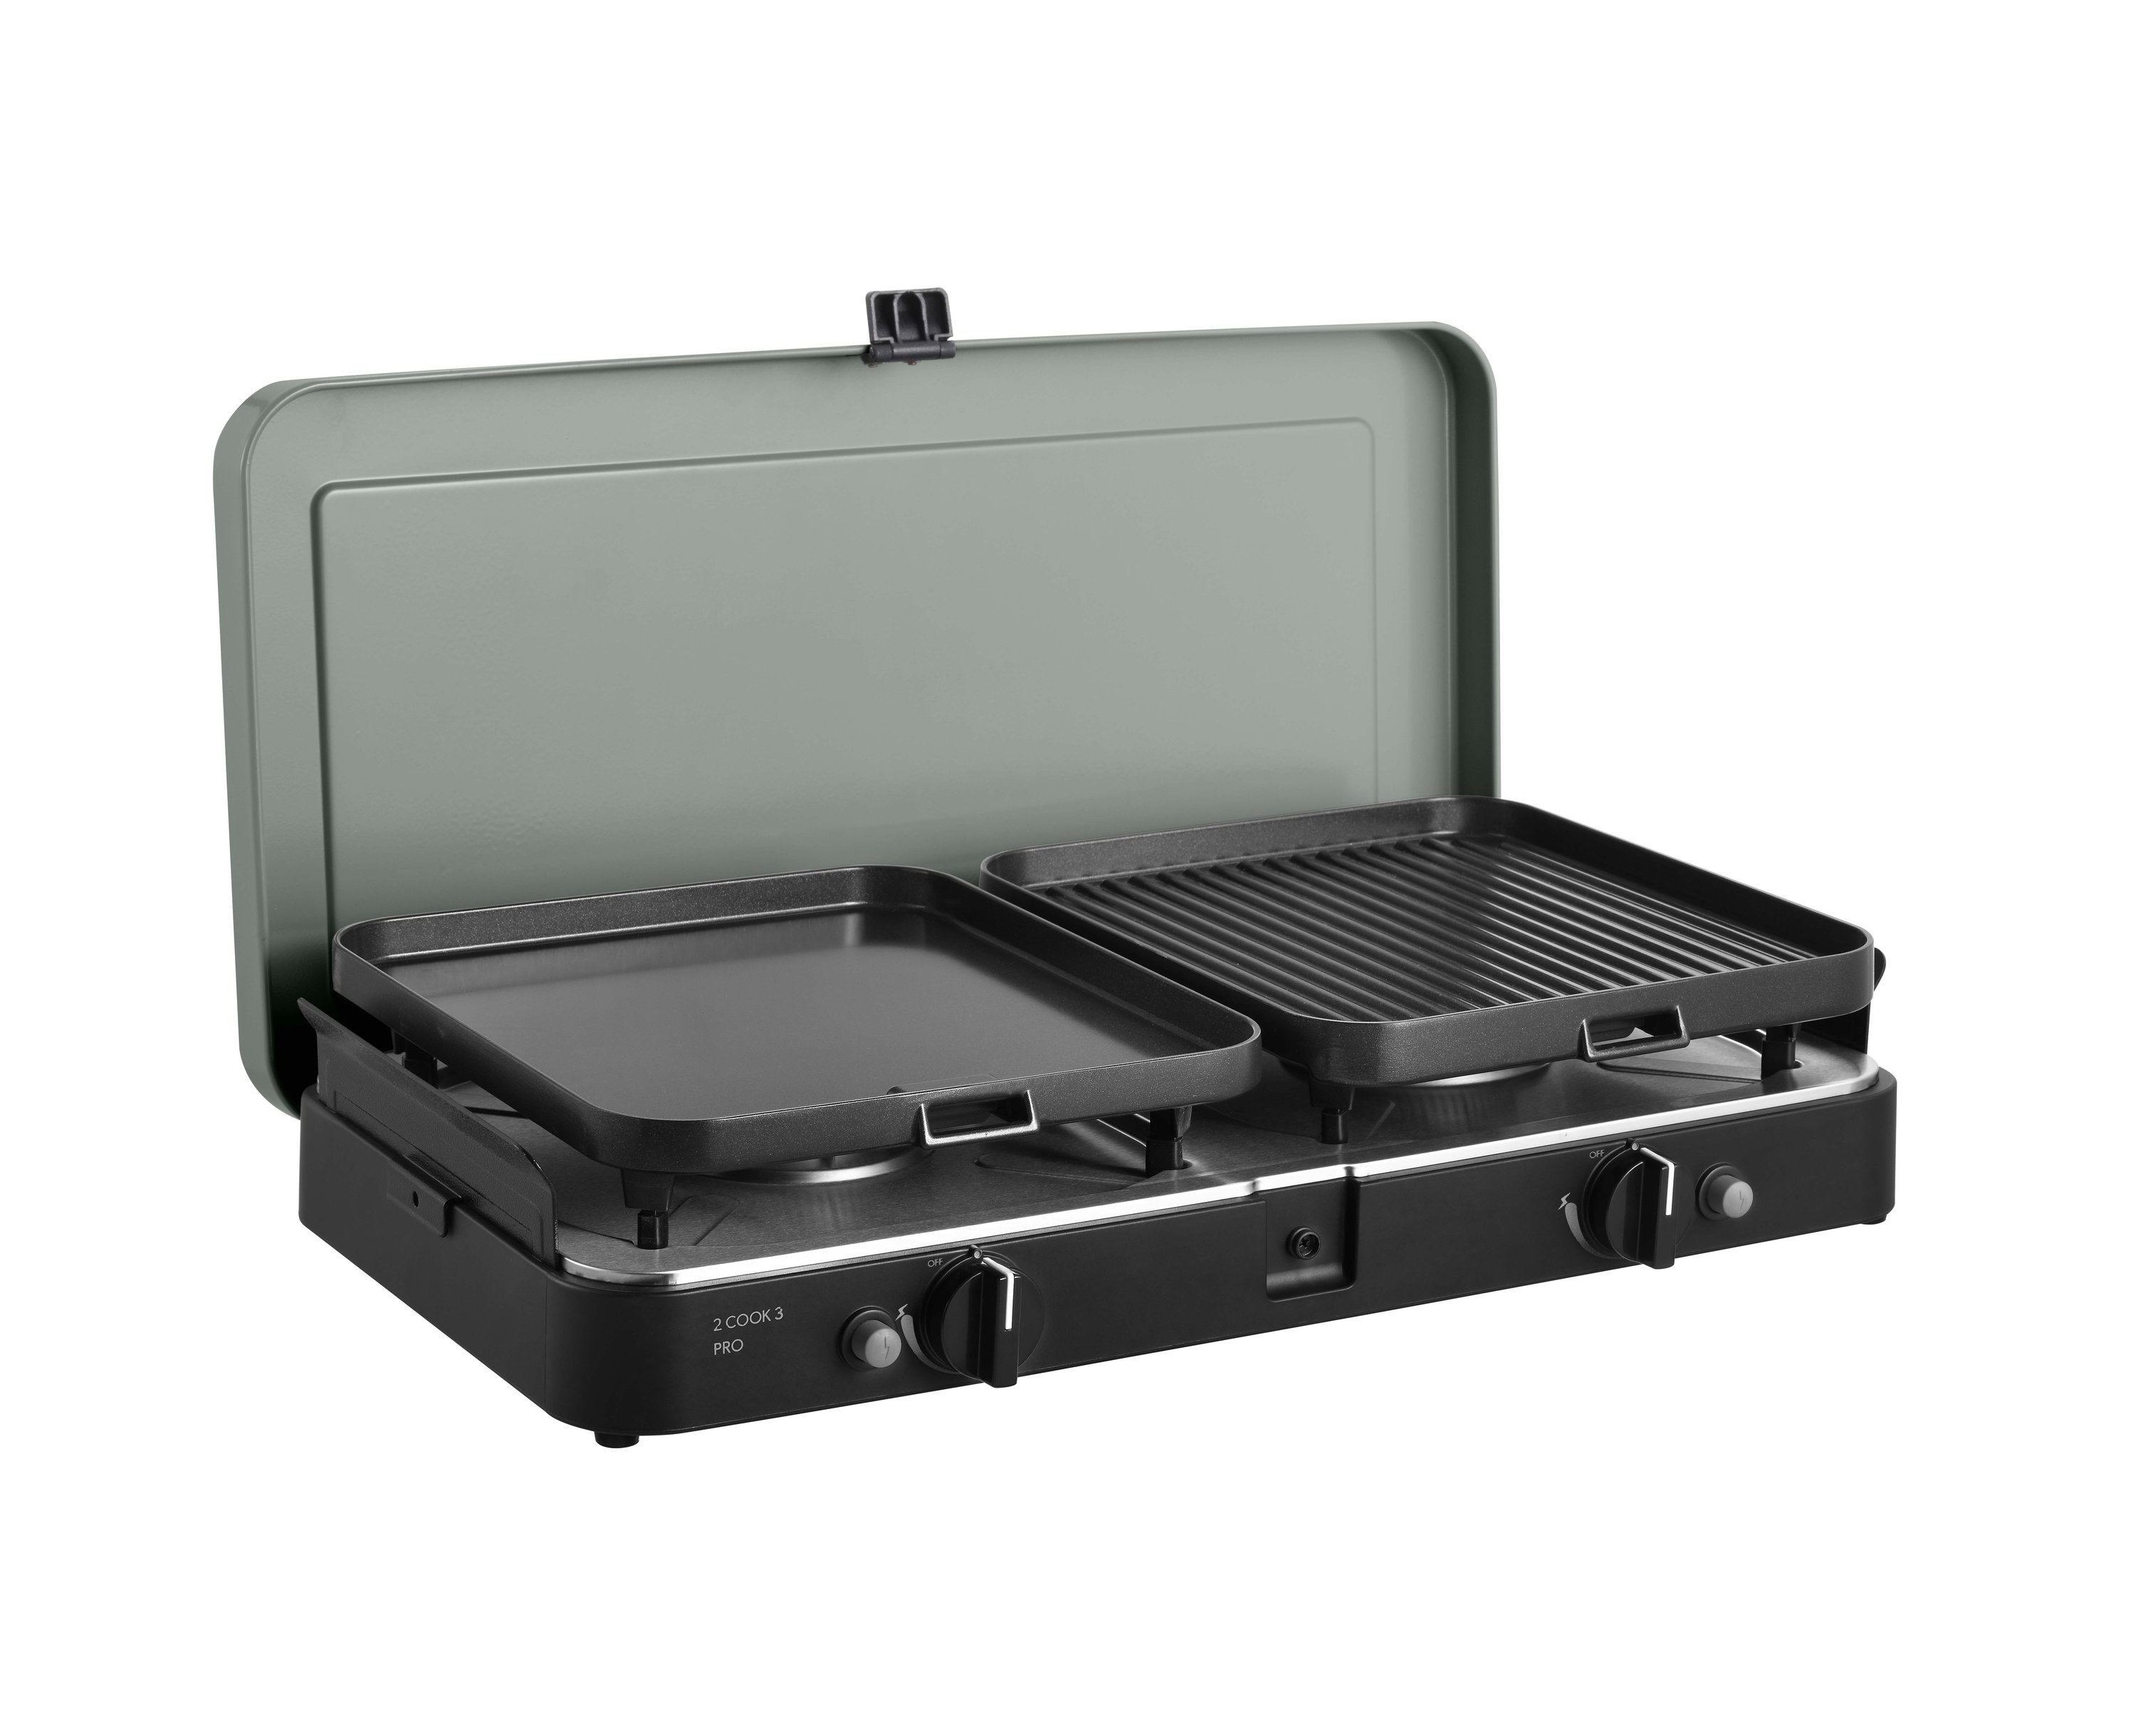 CADAC 2 Cook 3 Pro Deluxe 50 mbar